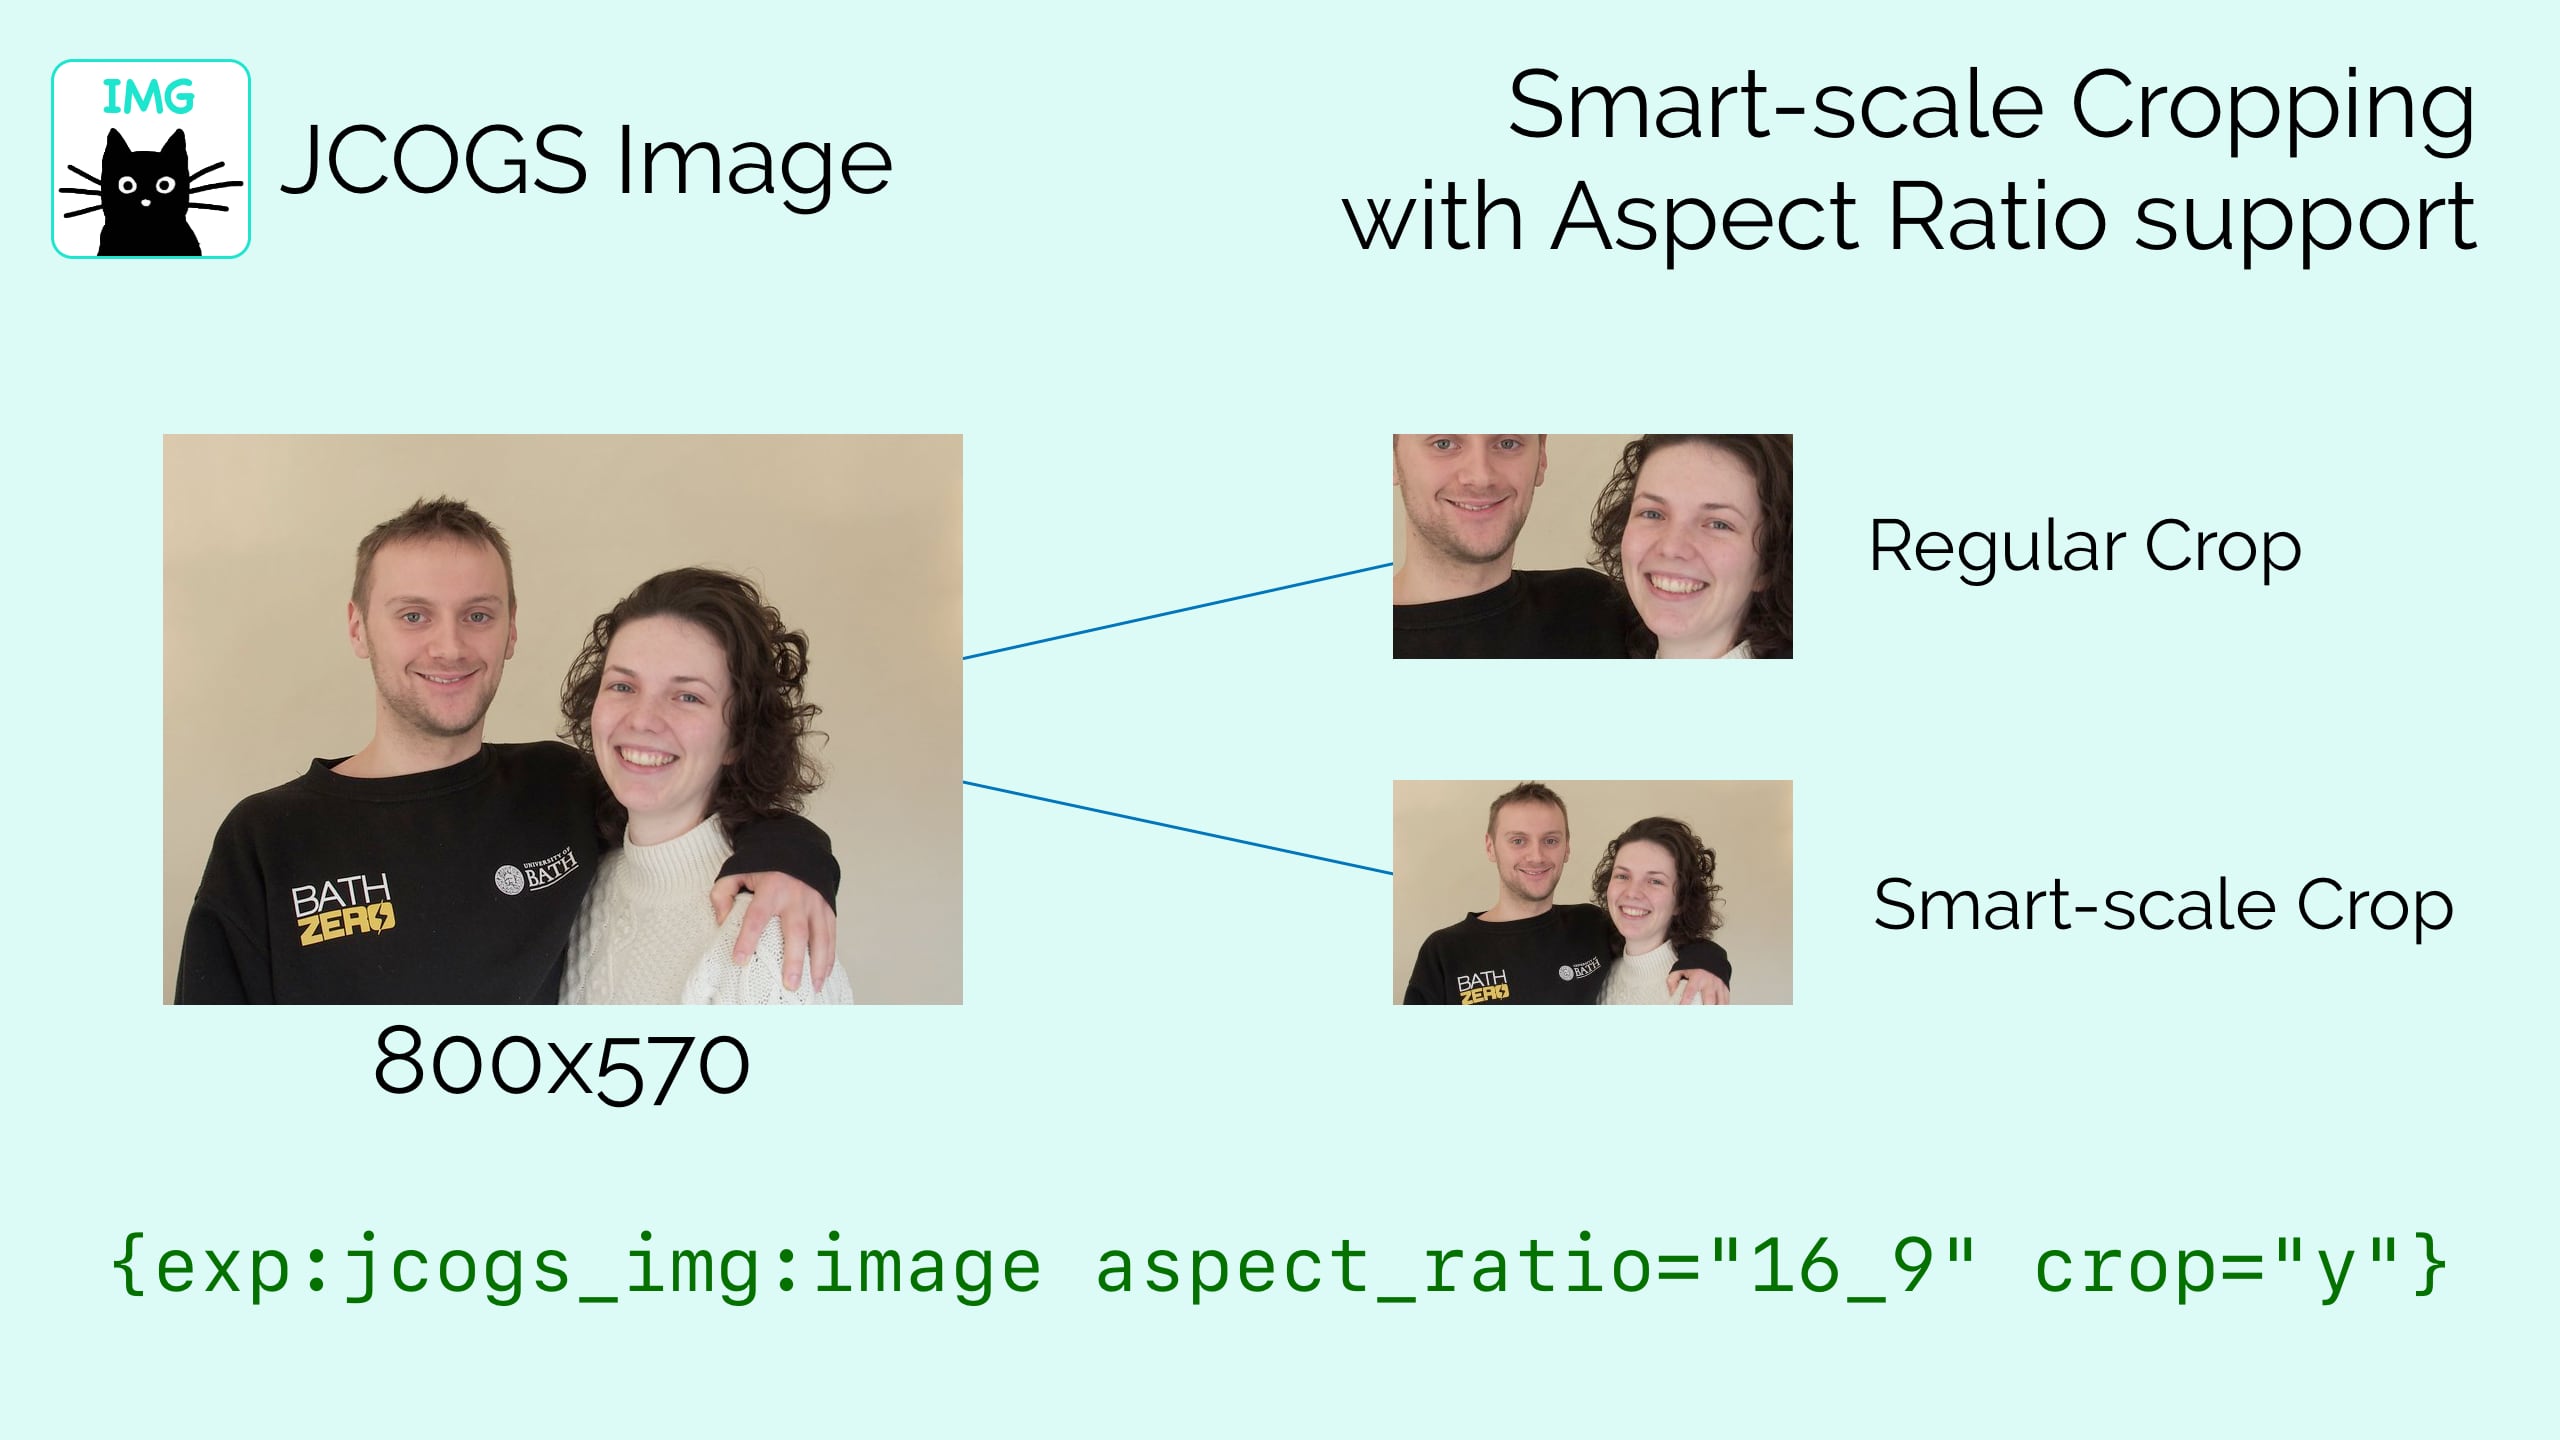 Smart-scale Cropping with Aspect Ratio support